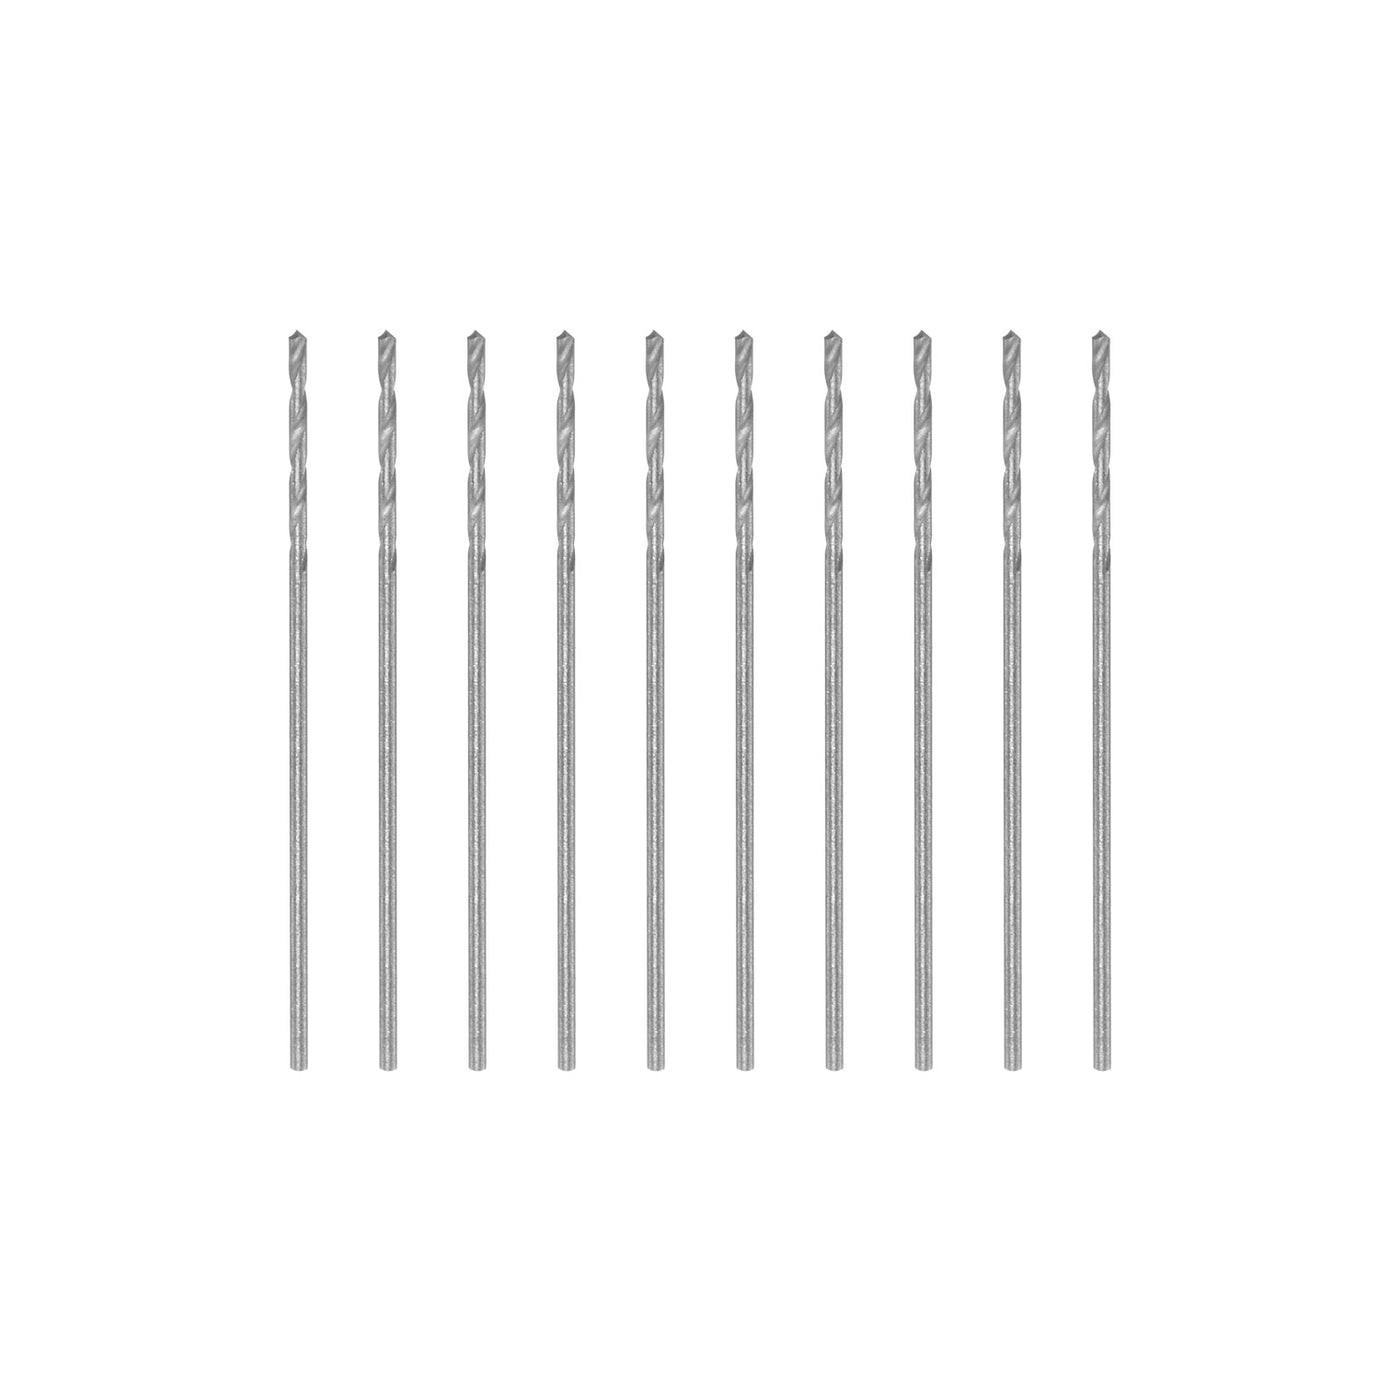 uxcell Uxcell 10 Pcs 0.6mm High Speed Steel Drill Bits, Fully Ground 24mm Length Drill Bit